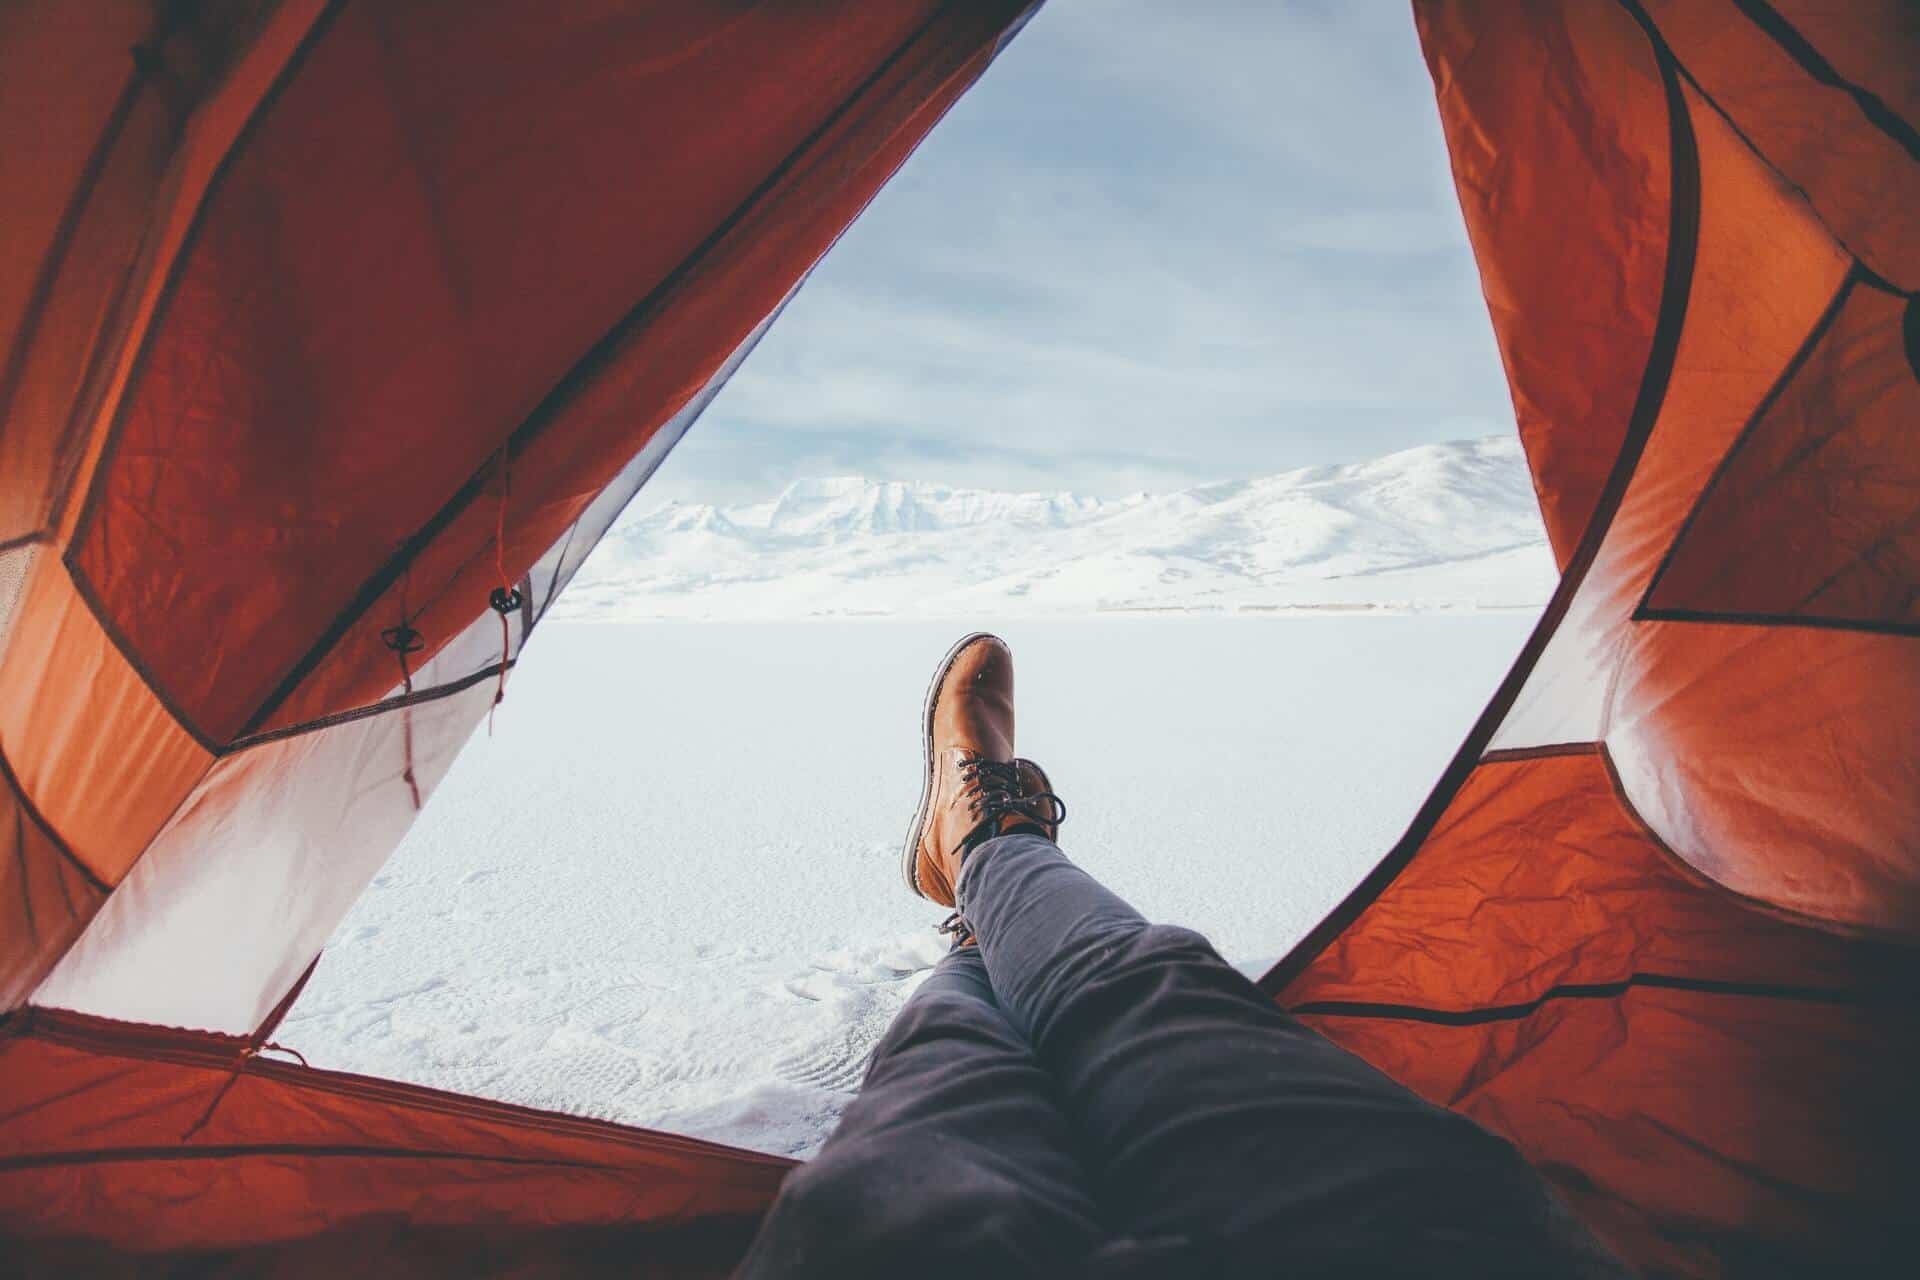 View out of a tent product into snow during a winter camping outdoor experience